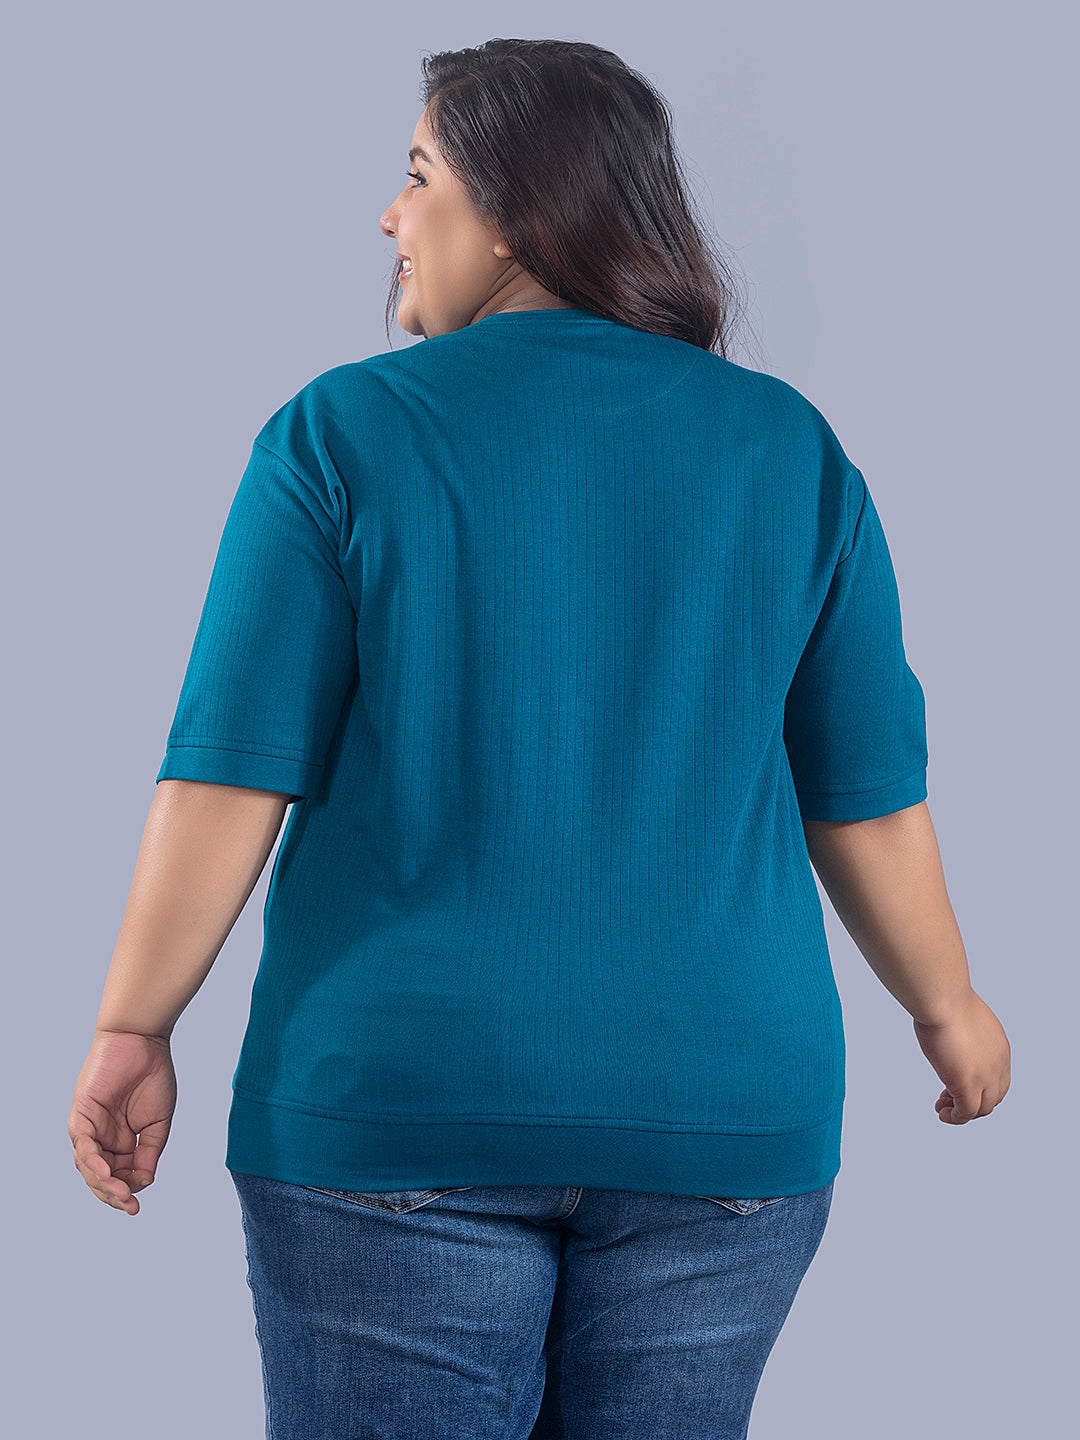 Plus Size Cotton Street Style T-shirts For Summer -Teal Blue